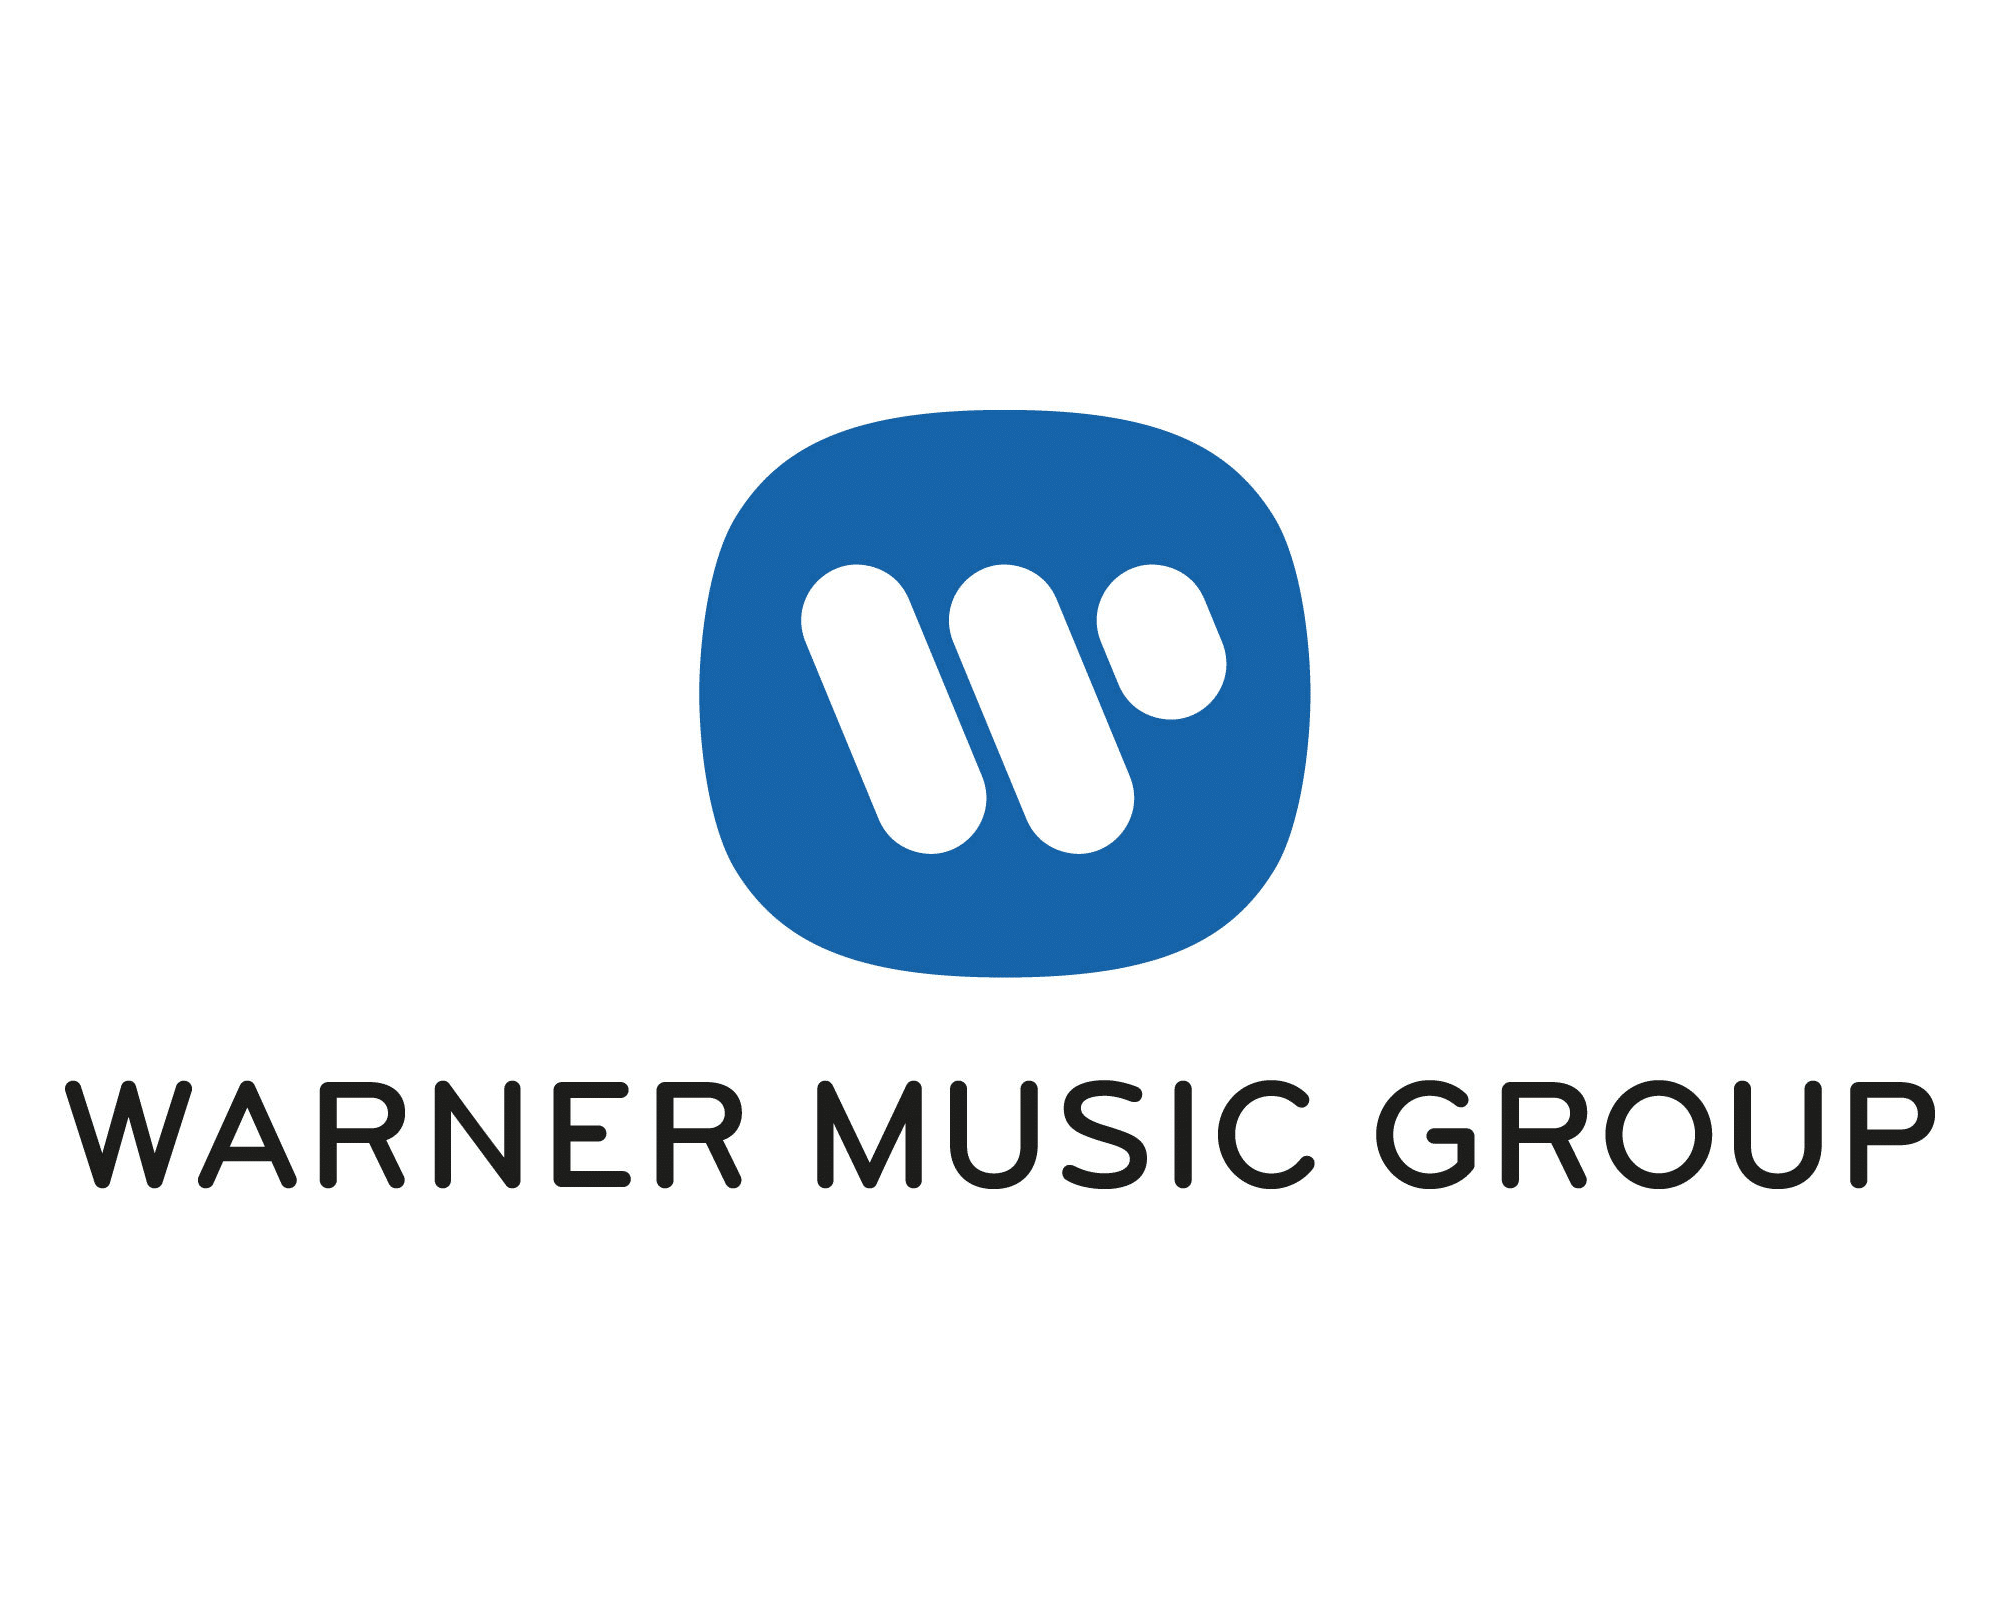 https://thewellbeingproject.co.uk/wp-content/uploads/2021/11/Warner-Music-Group-logo-1.png